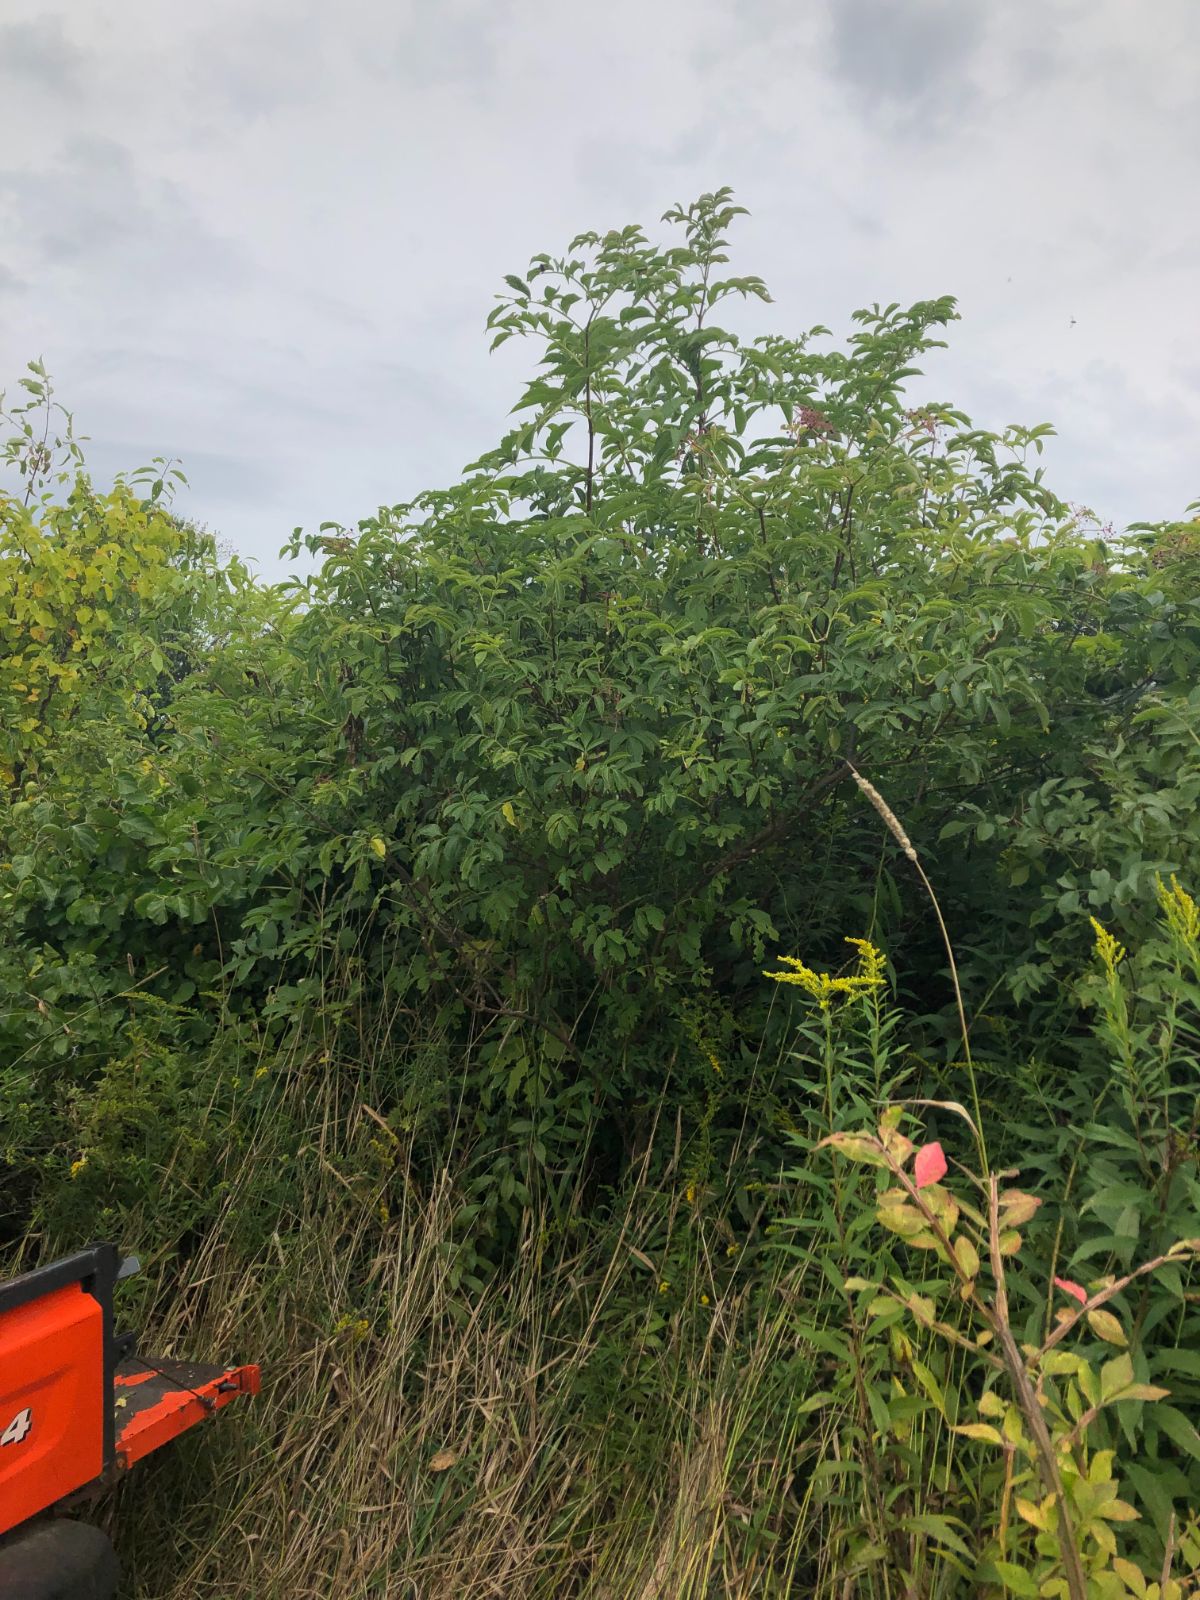 A UTV backed up to a tall elderberry bush for picking